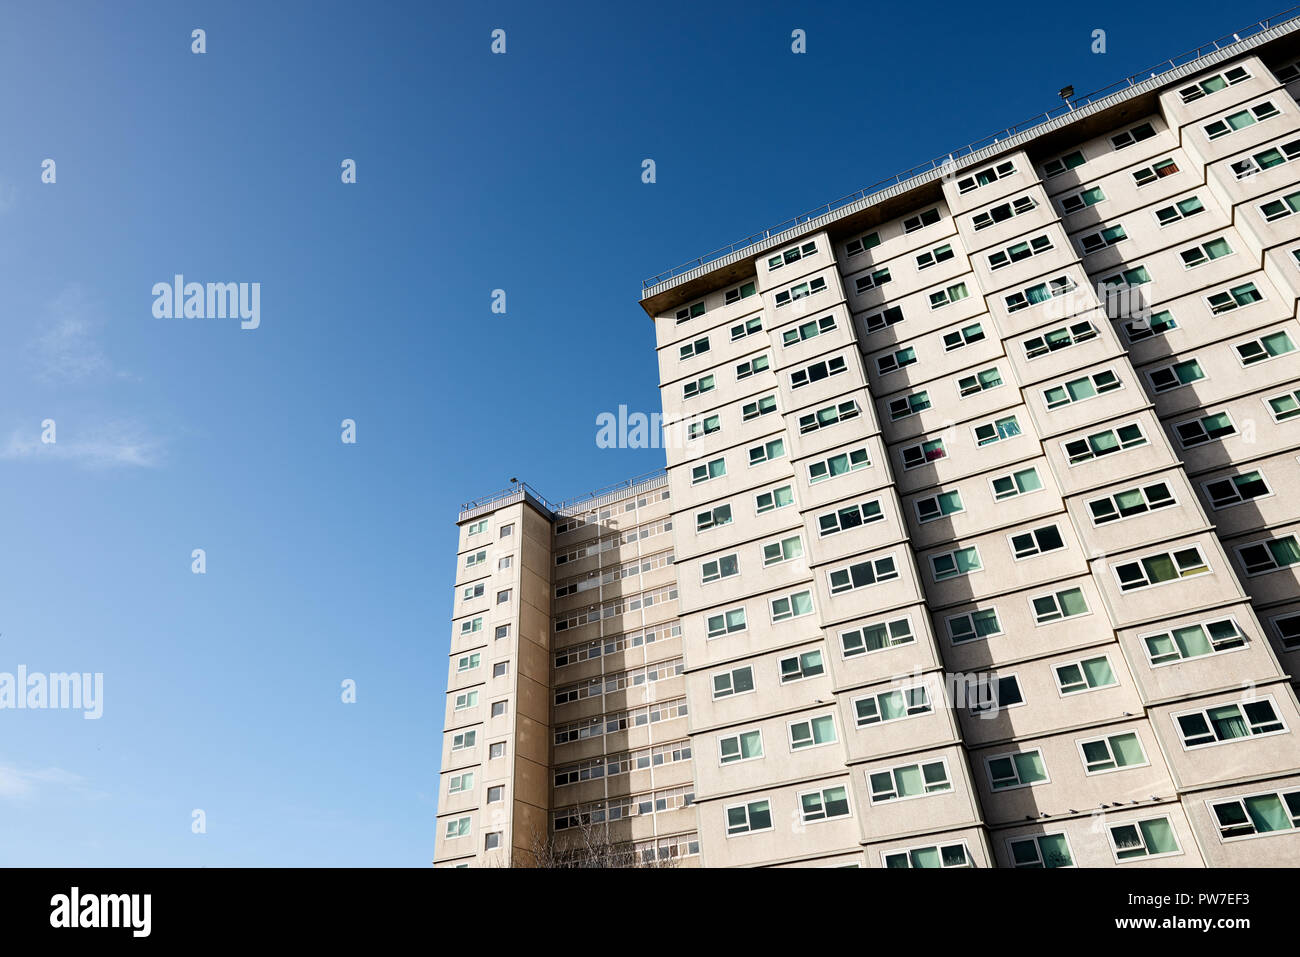 Social housing apartment tower block against a blue sky. Stock Photo